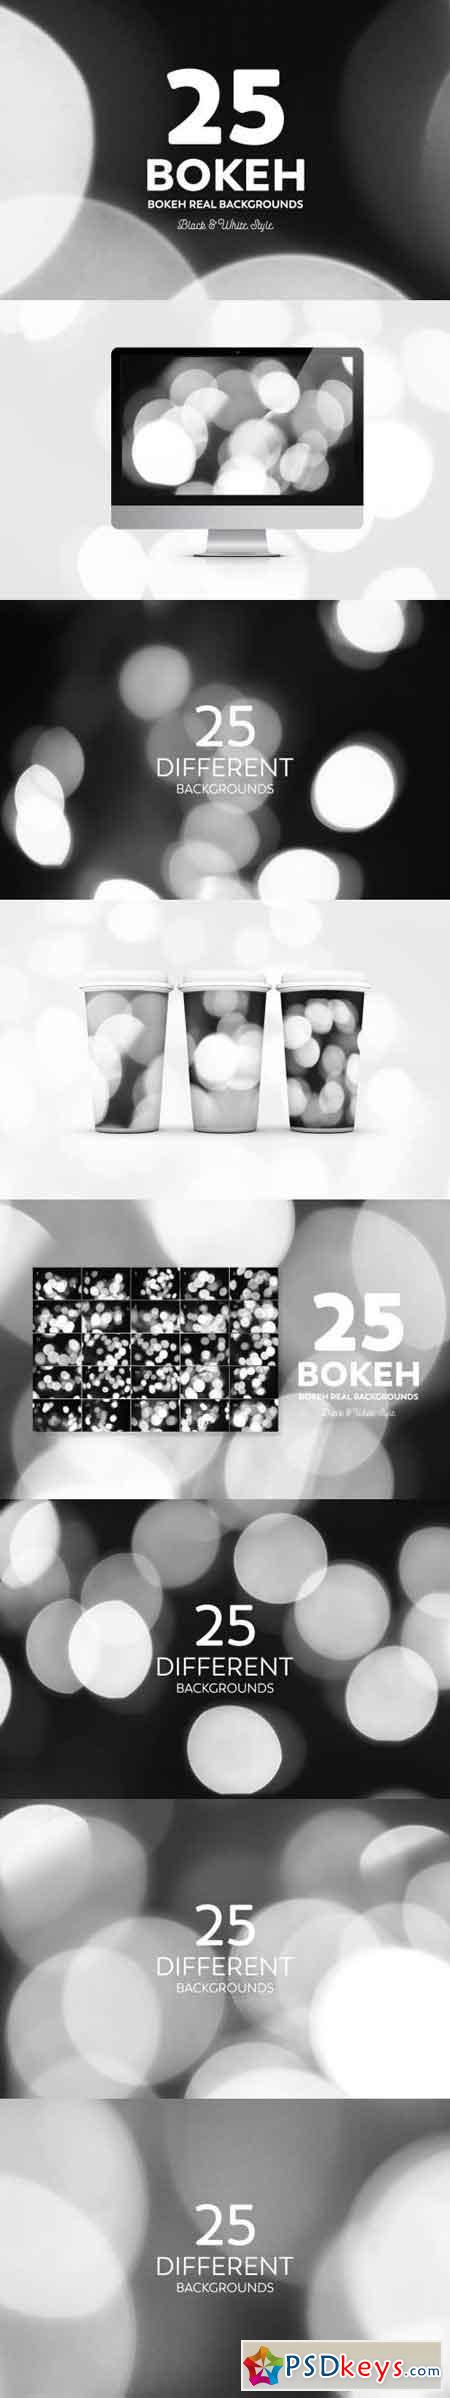 25 Bokeh Real Backgrounds Black & White Style